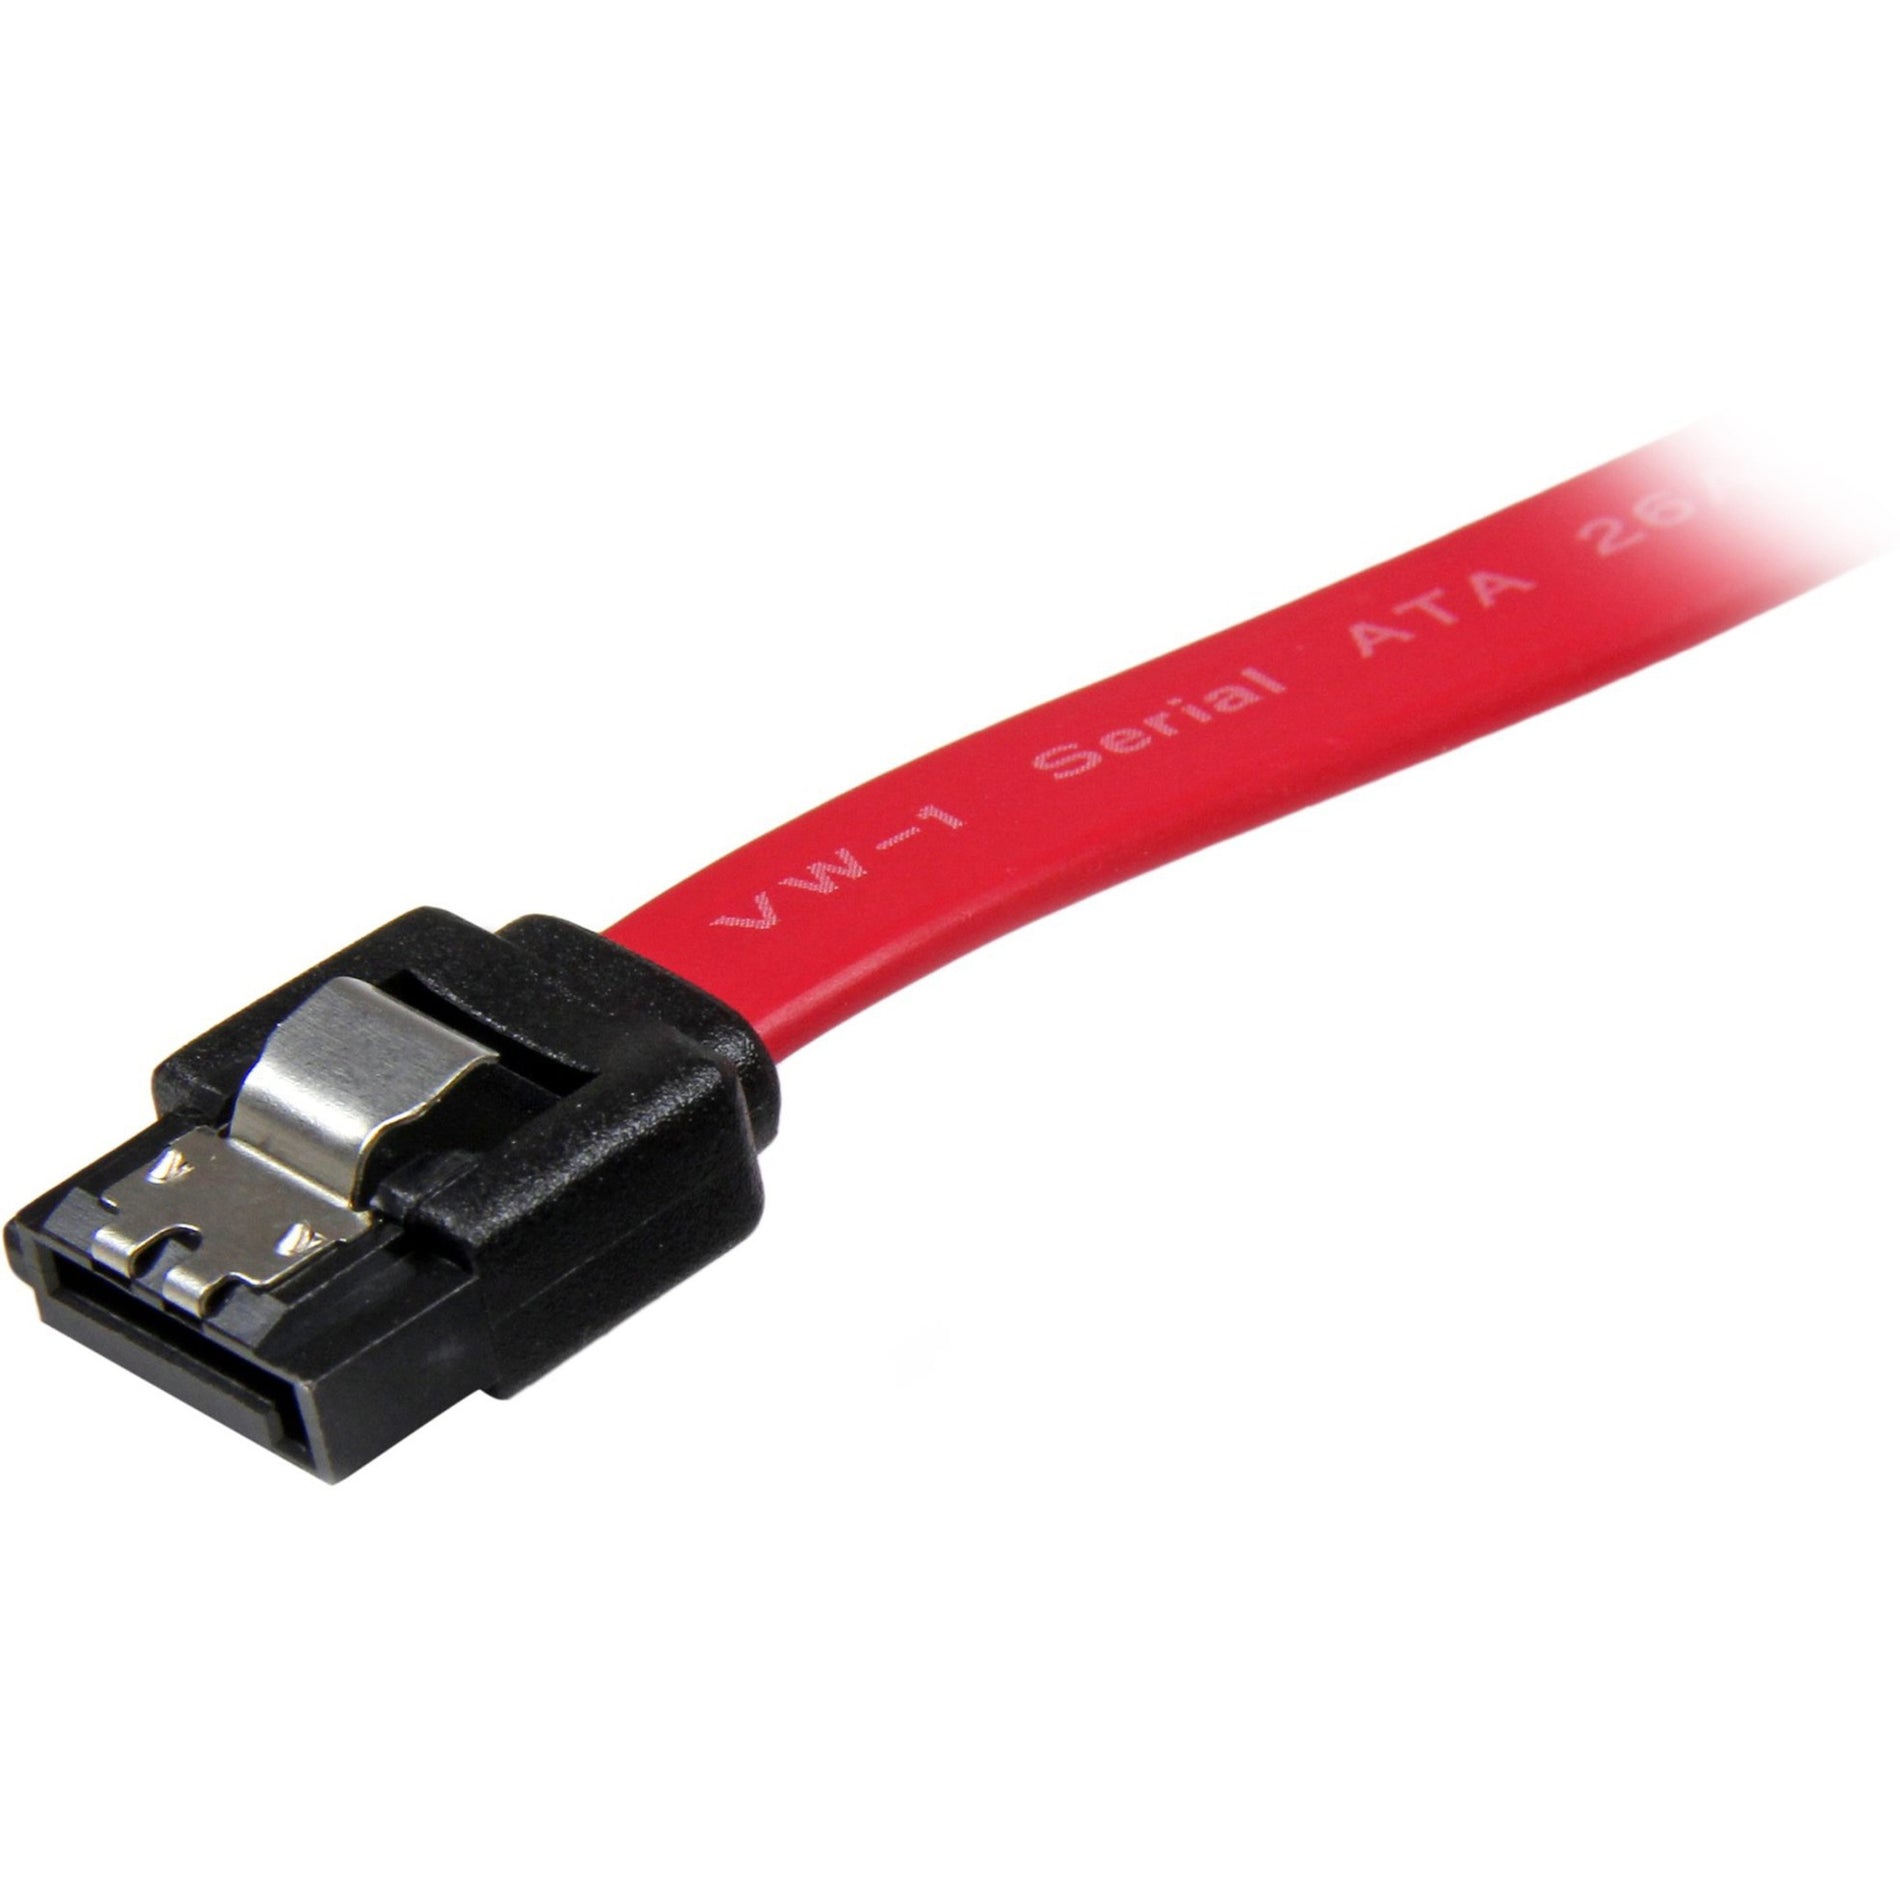 StarTech.com LSATA6 6in Latching SATA Cable, Flexible, 6 Gbit/s Data Transfer Rate, Red